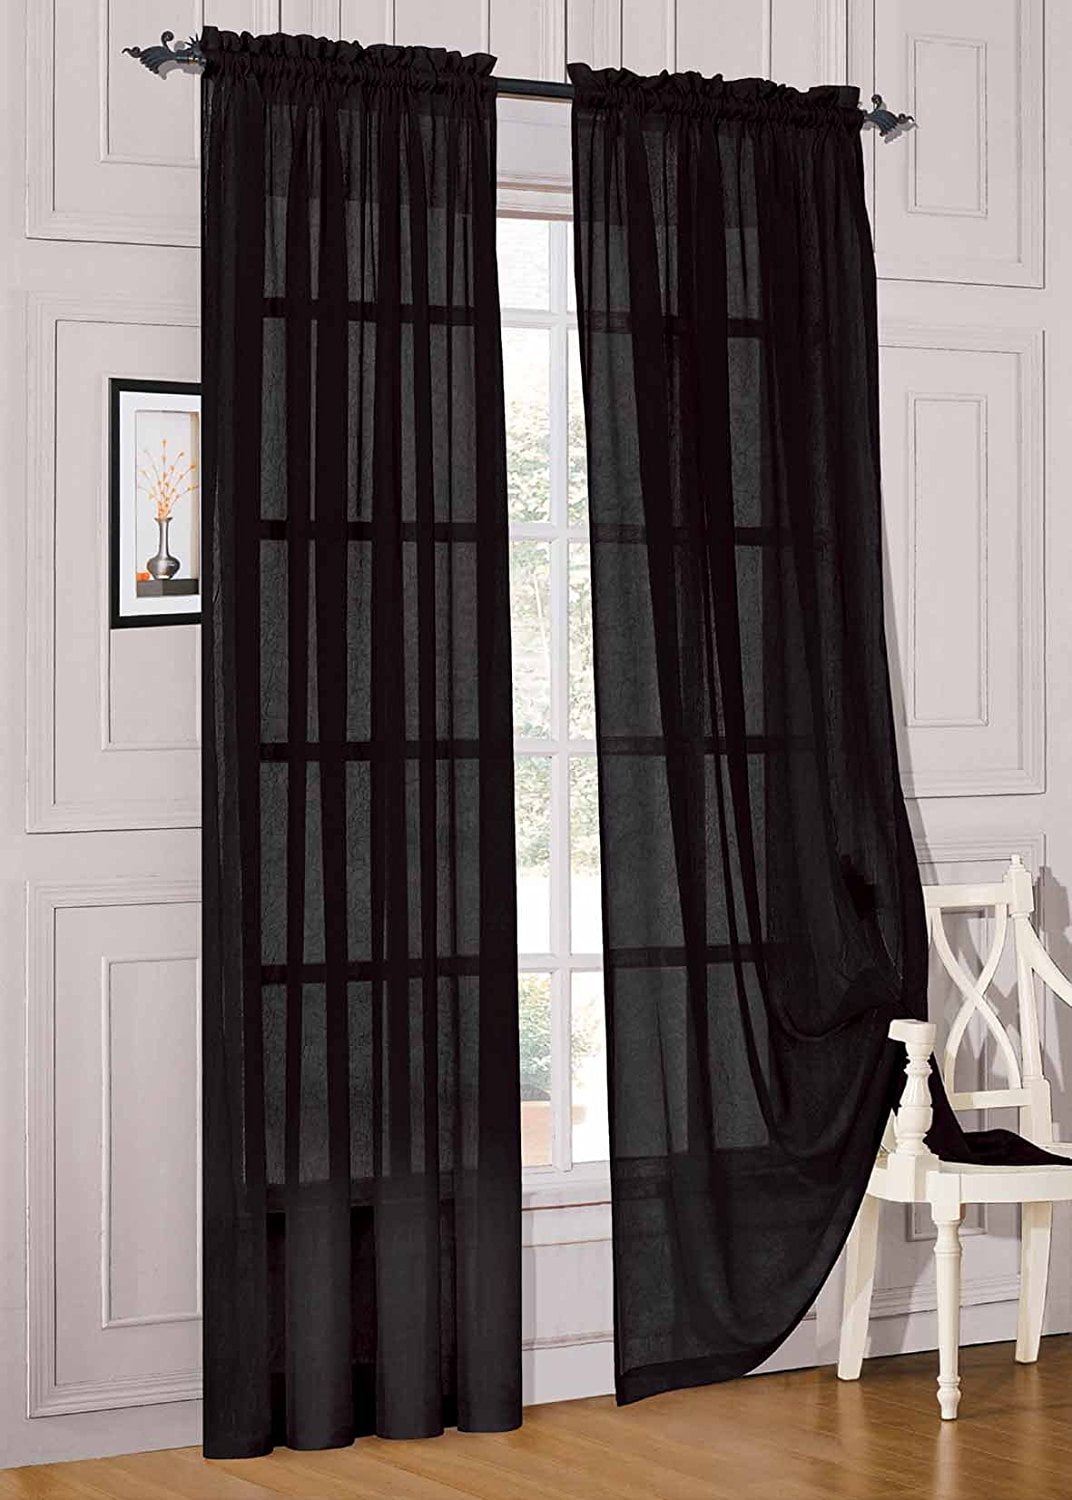 2 Piece Solid Sheer Window Curtains/drape/panels/treatment size 54" x 84" 